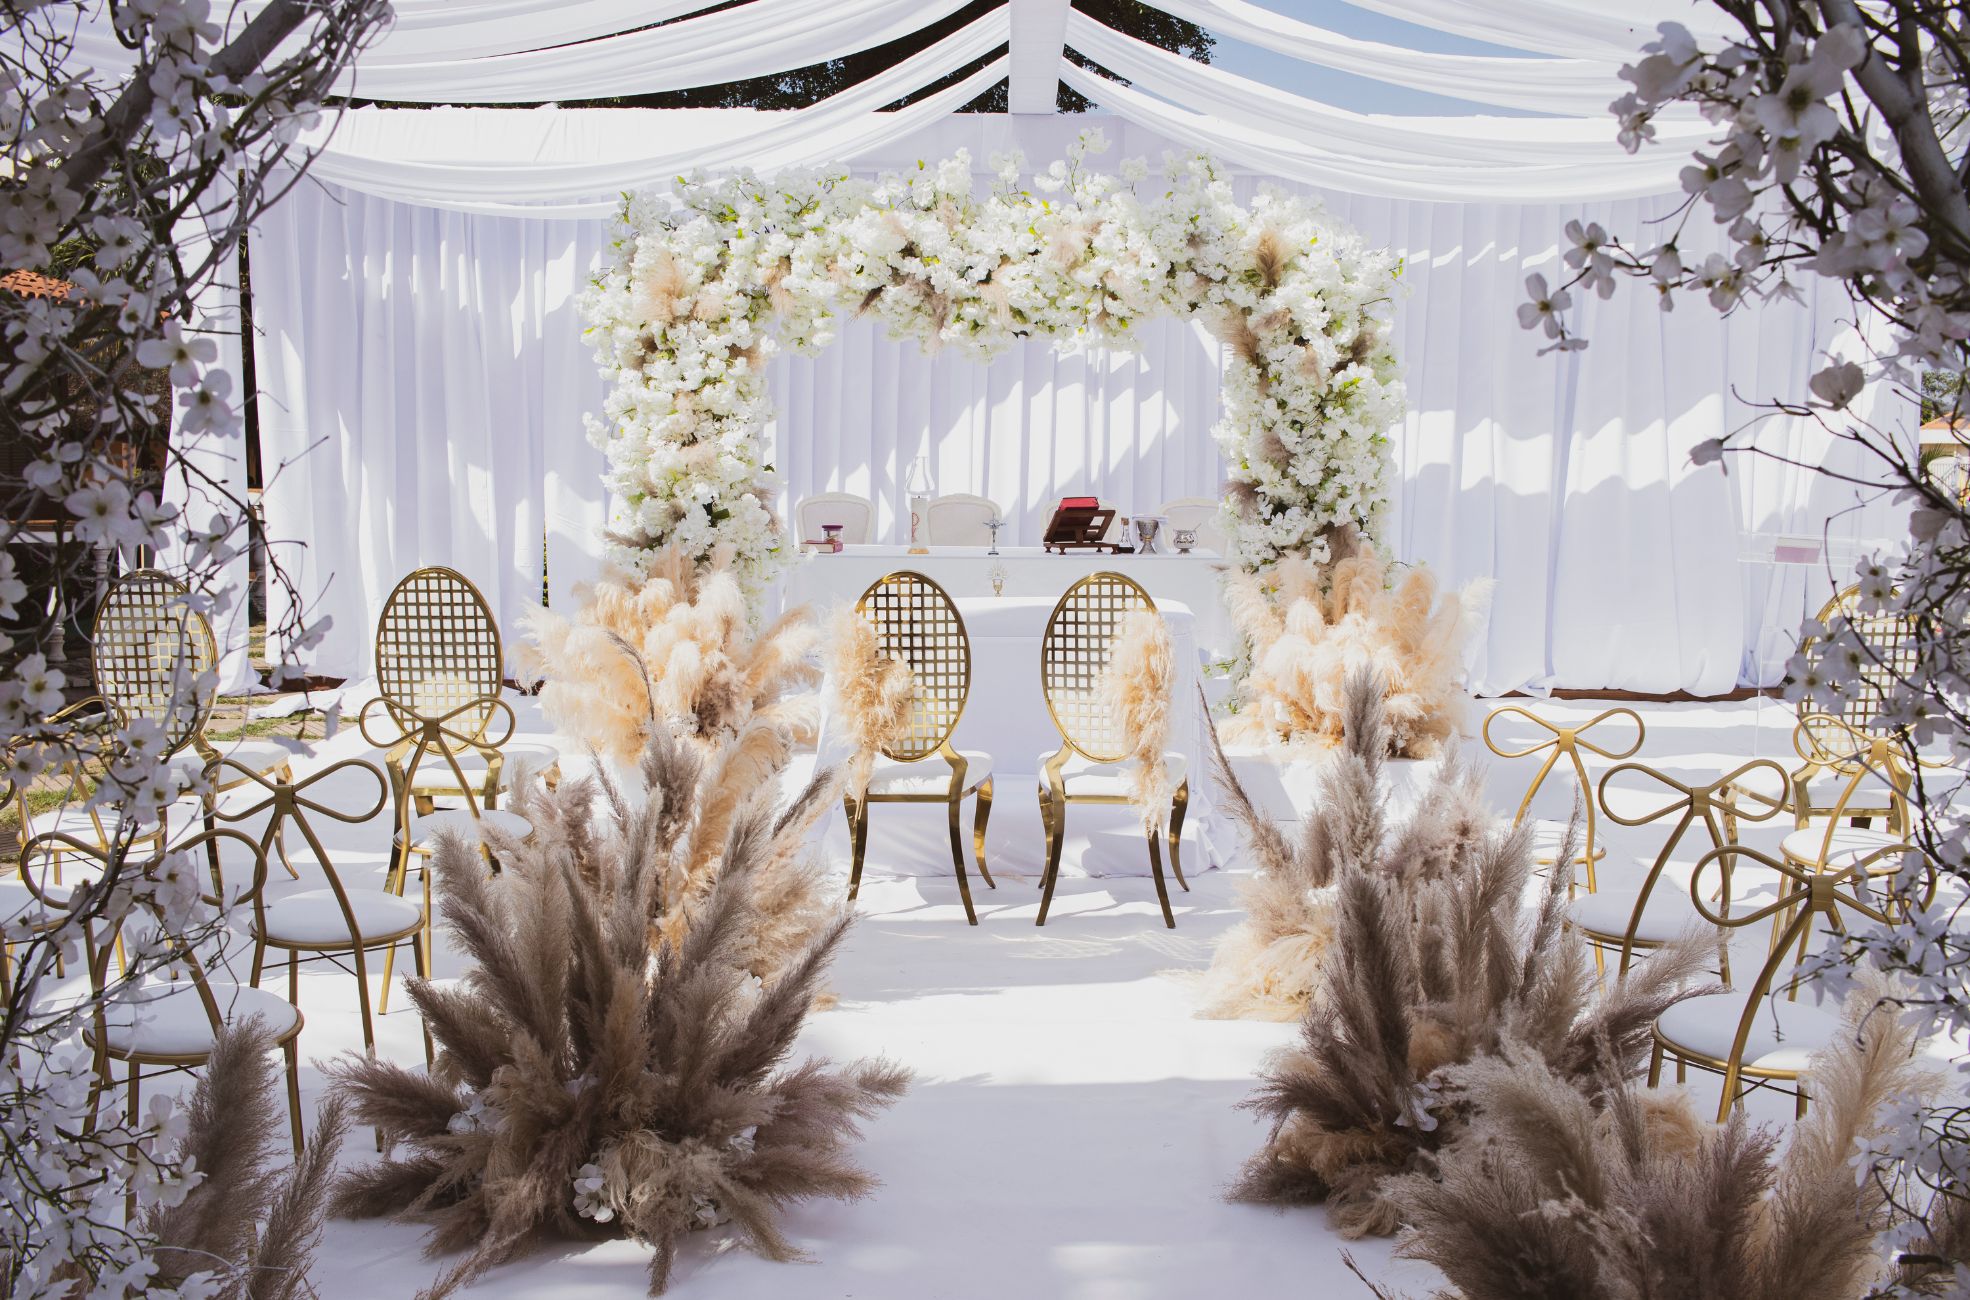 Wedding Aisle With Flowers